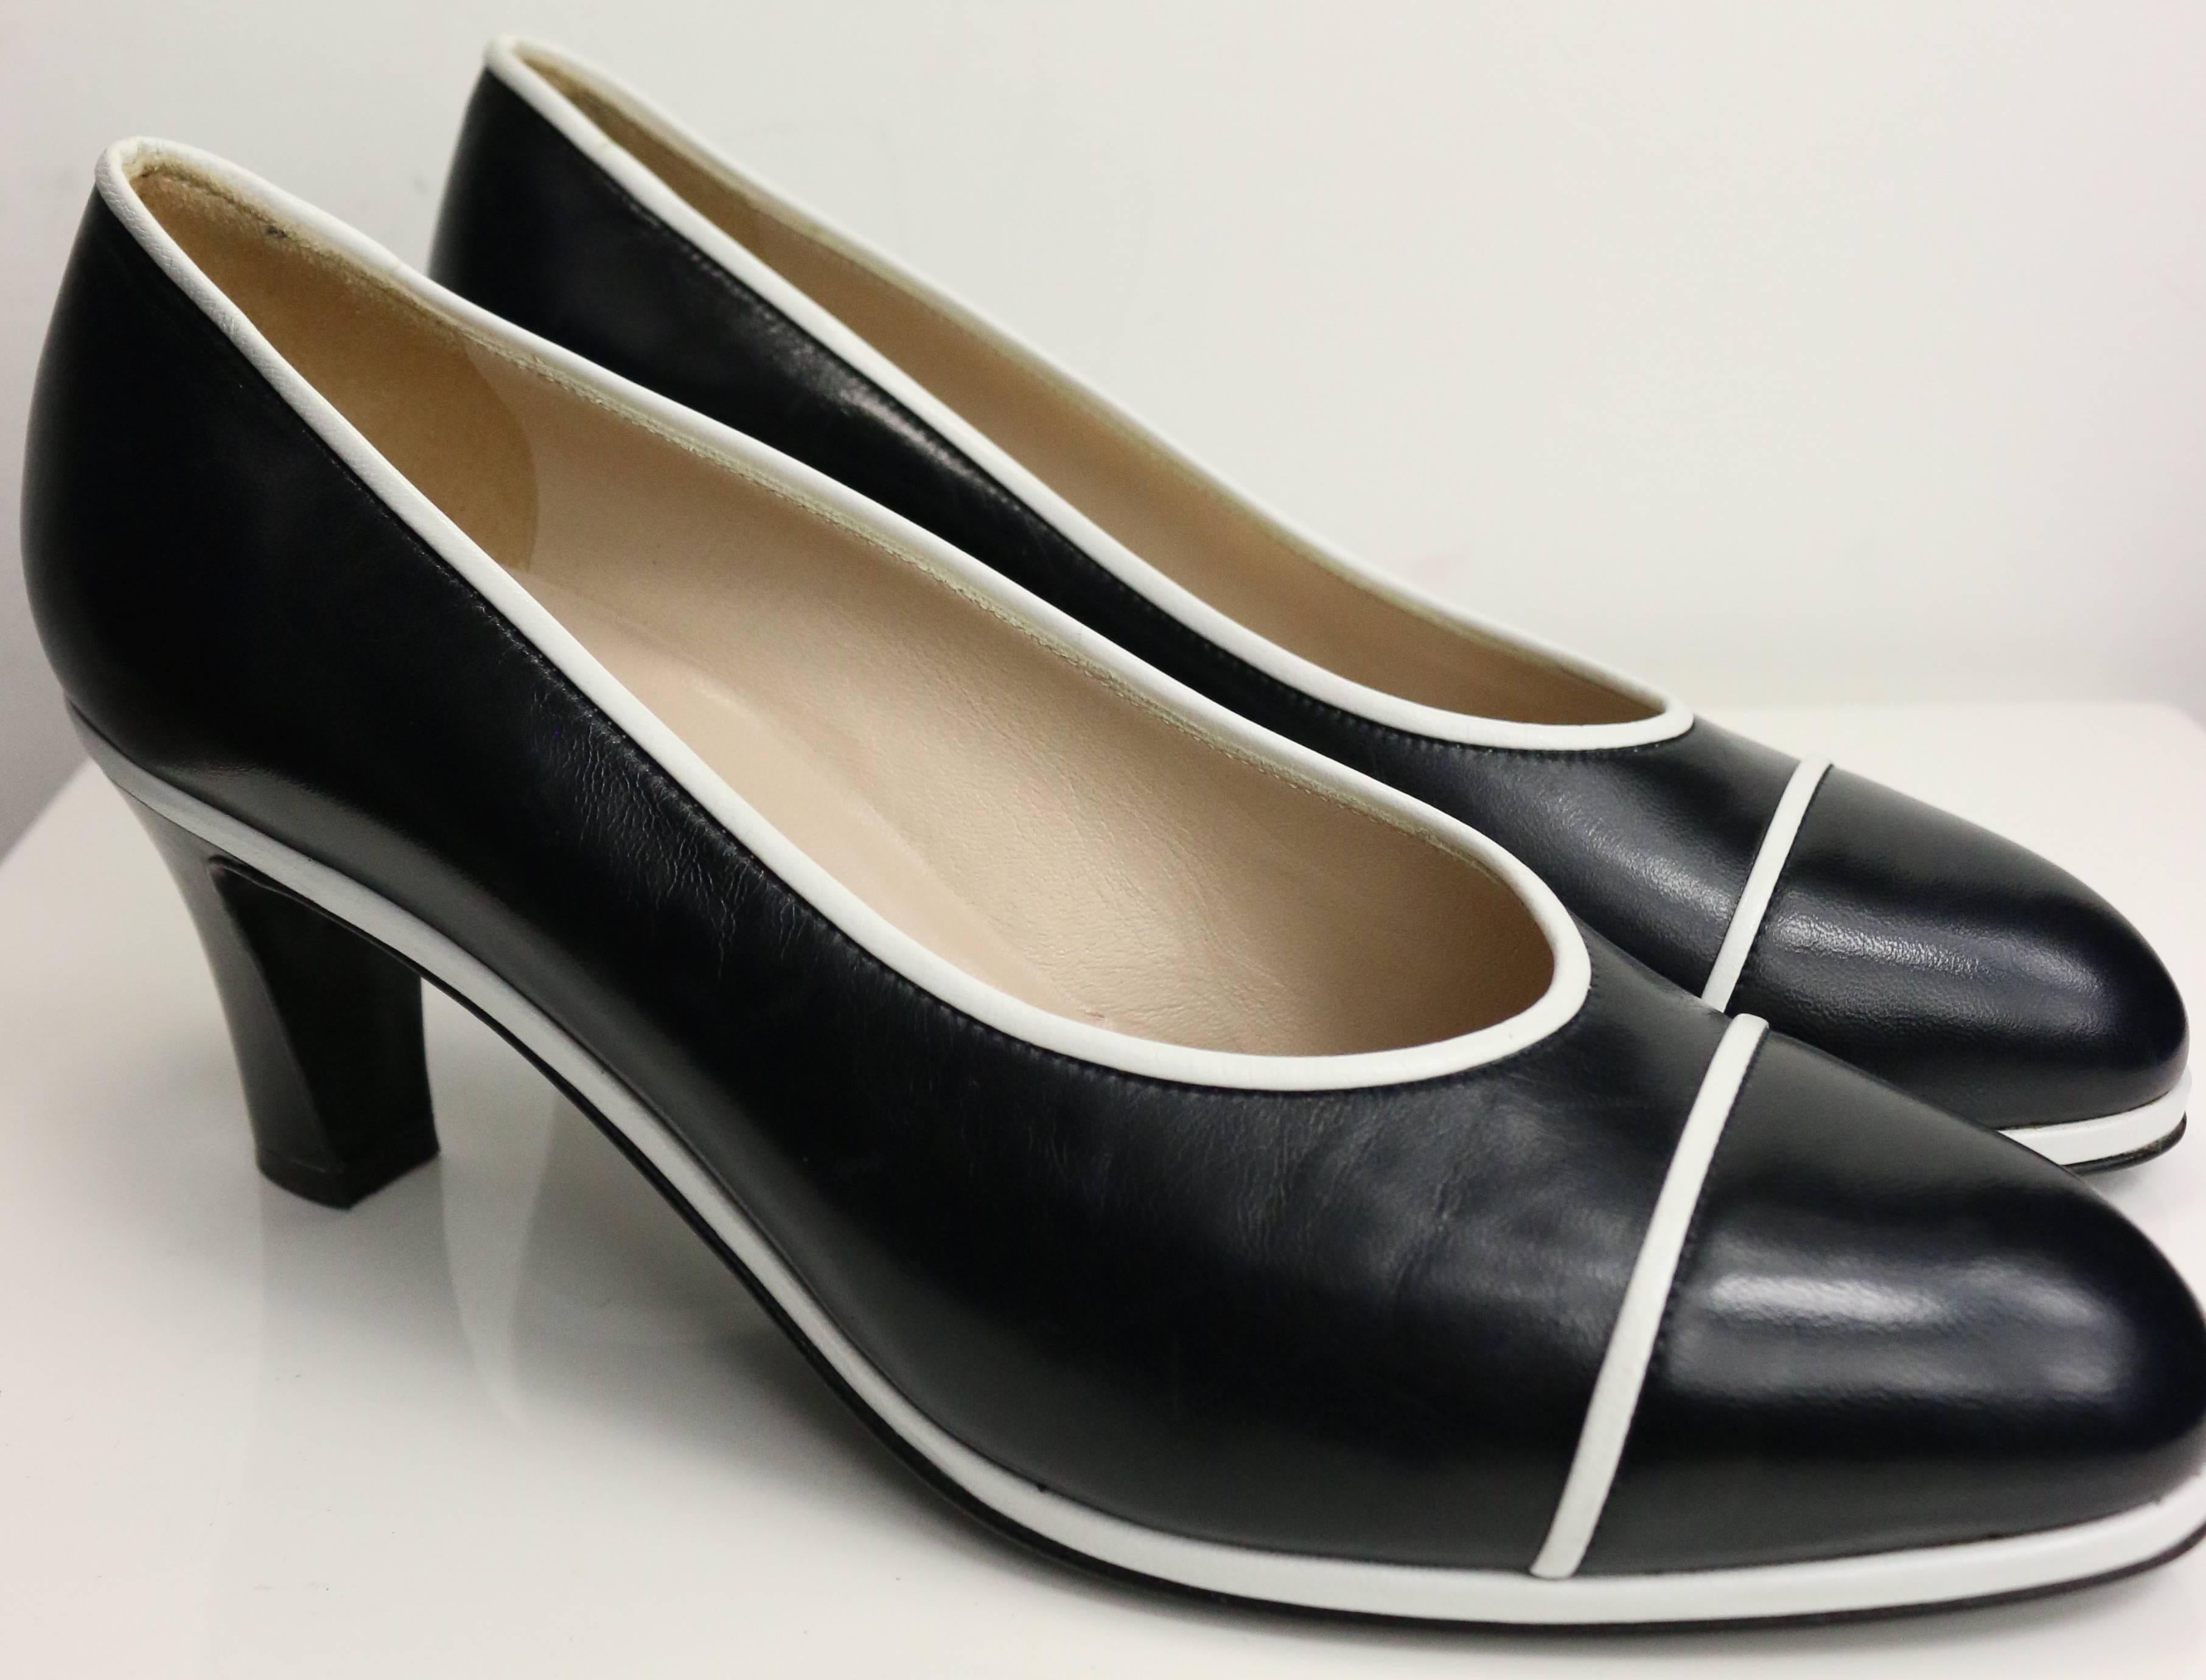 - Vintage 90s Chanel classic black calfskin leather pumps with white piped trim. 

- Made in Italy. 

- Size 37.5. 

- Length: 9 inches.  Heels: 2.5 inches. 

